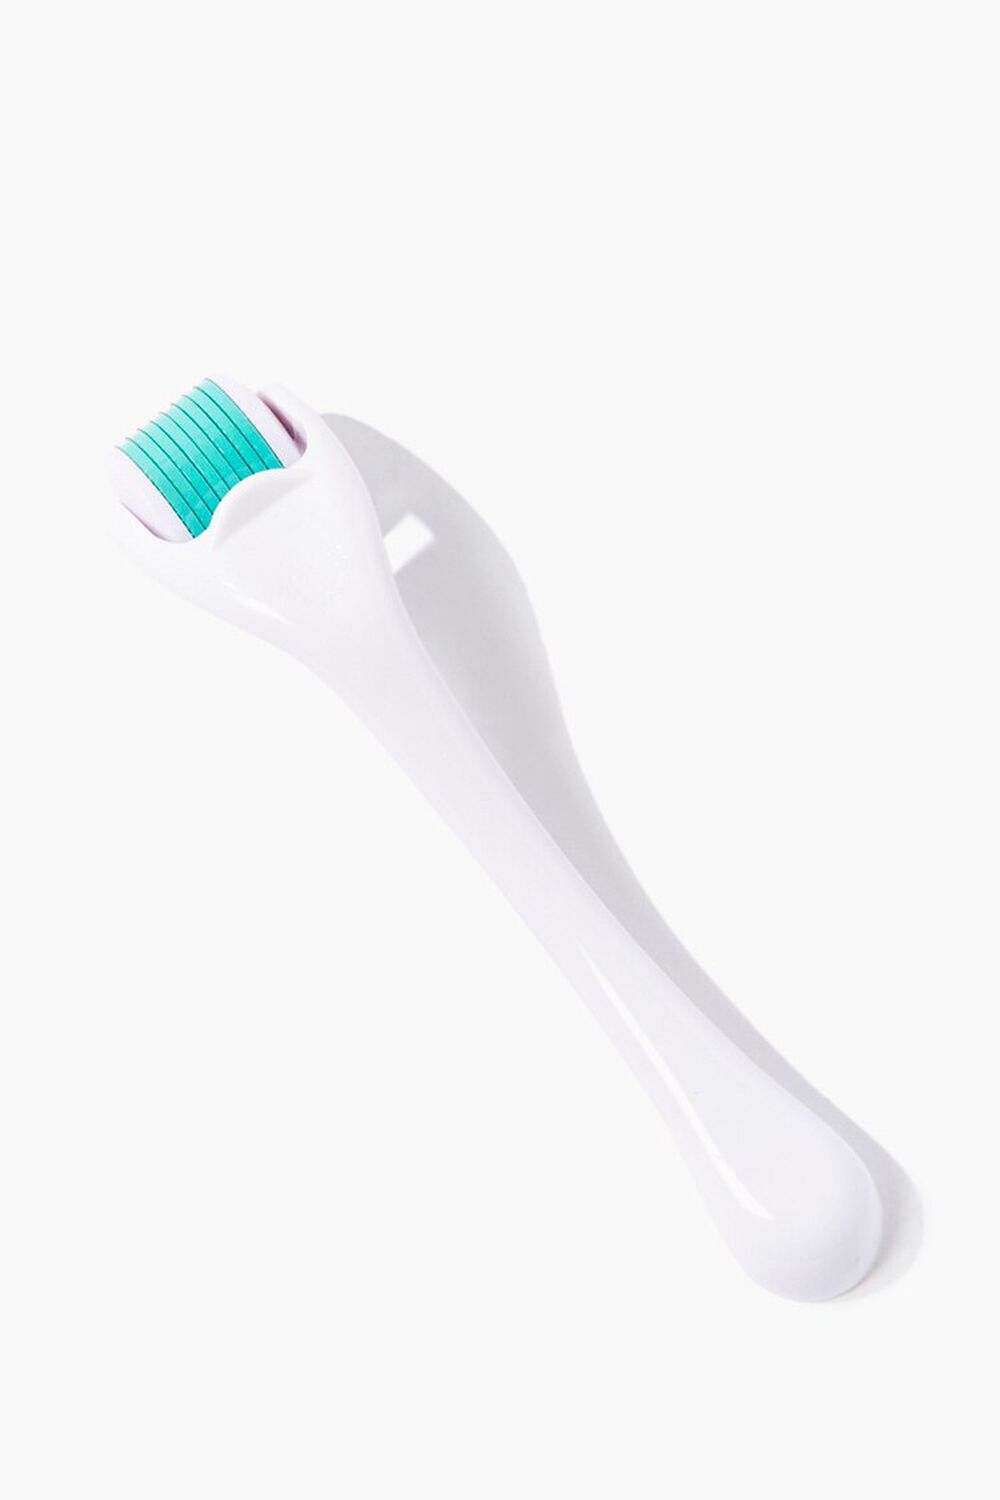 WHITE/MULTI Microneedle Facial Roller, image 2